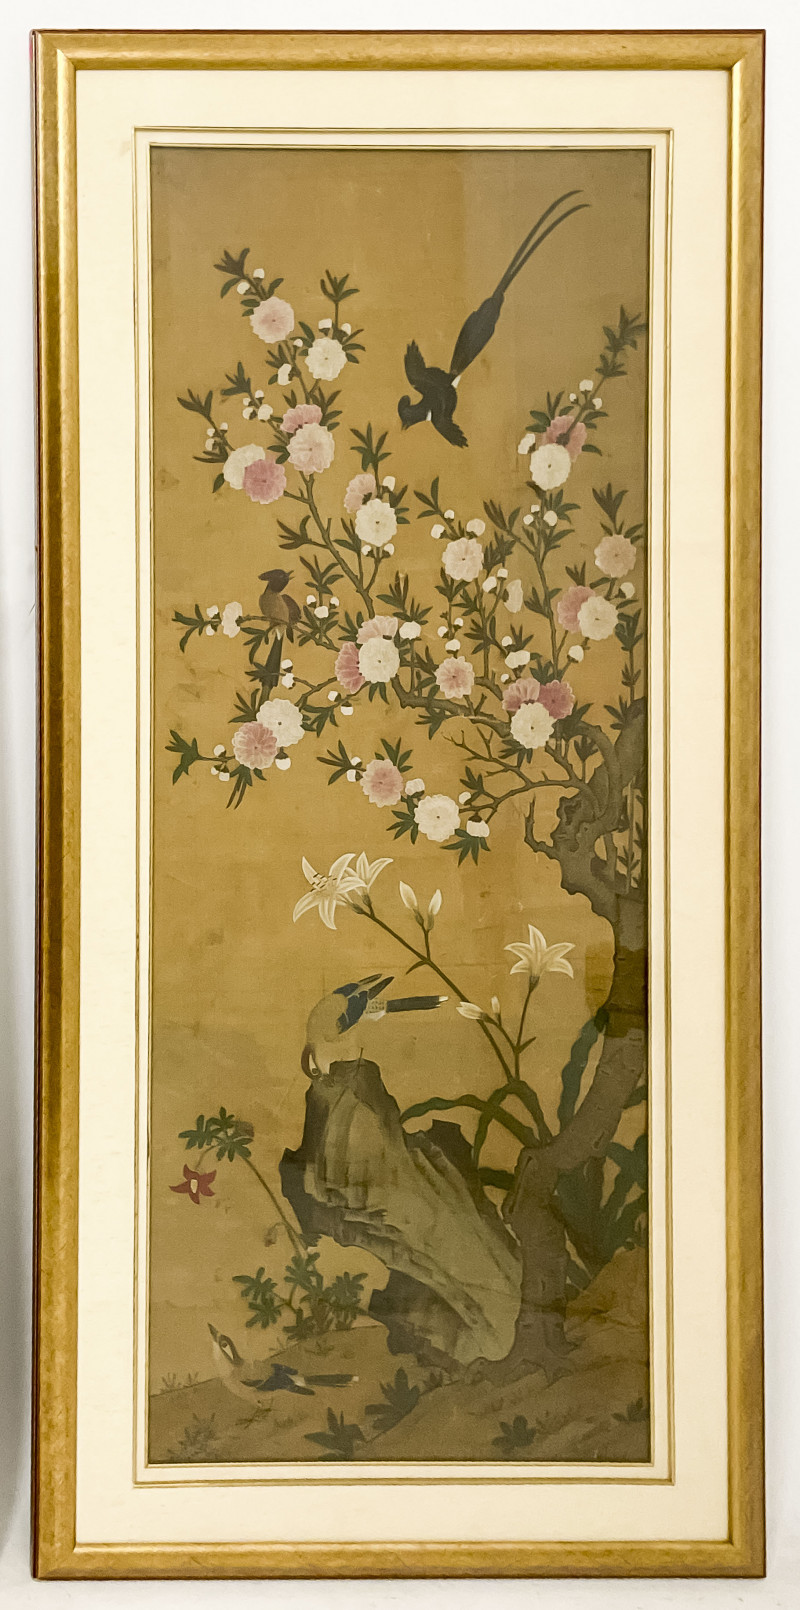 Pair of Chinese Paintings, Gardens, Color Ink on Silk